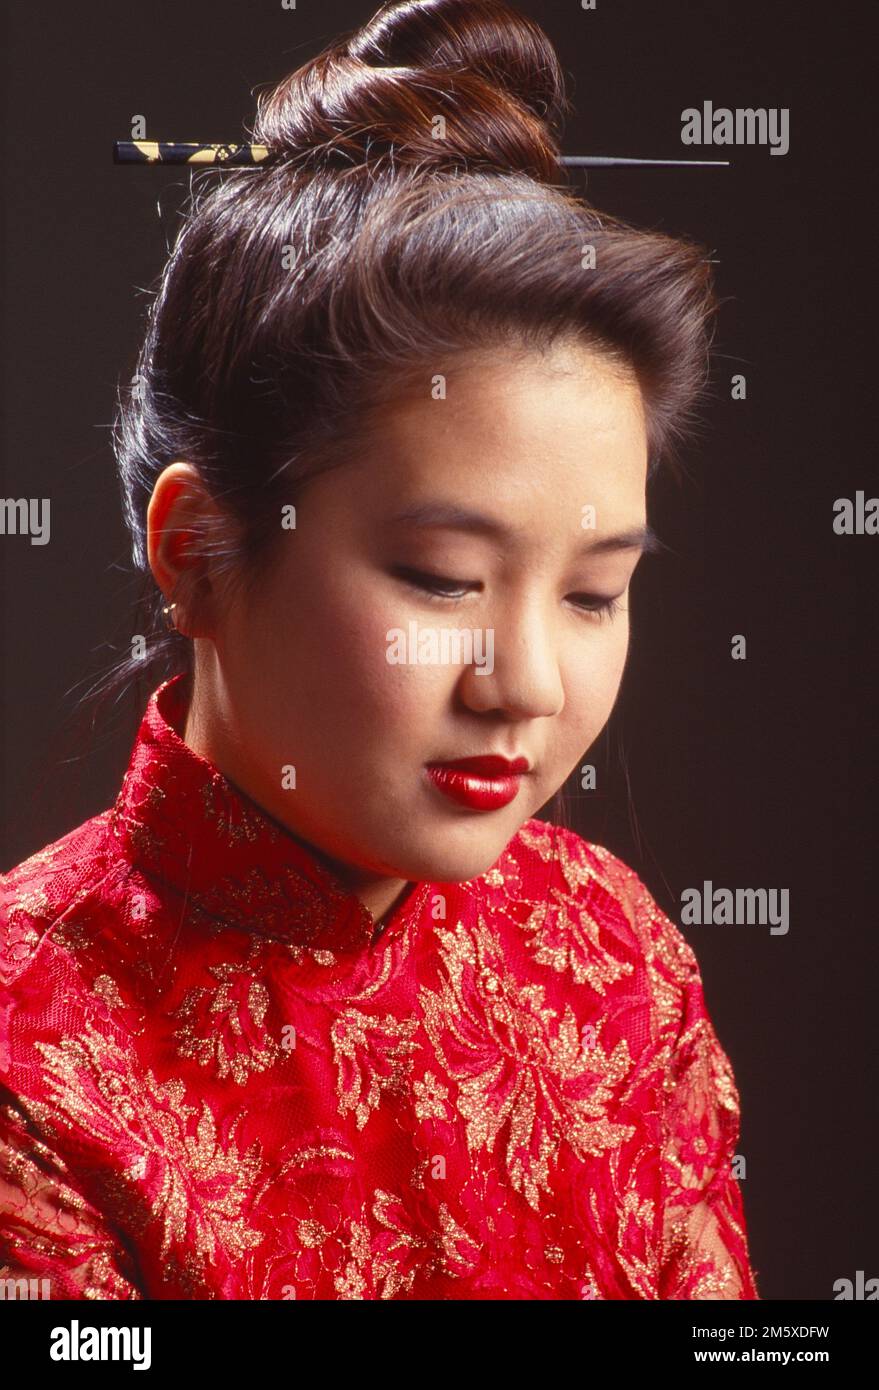 Young Asian woman dressed in a kimono looking pensive glancing downward Stock Photo